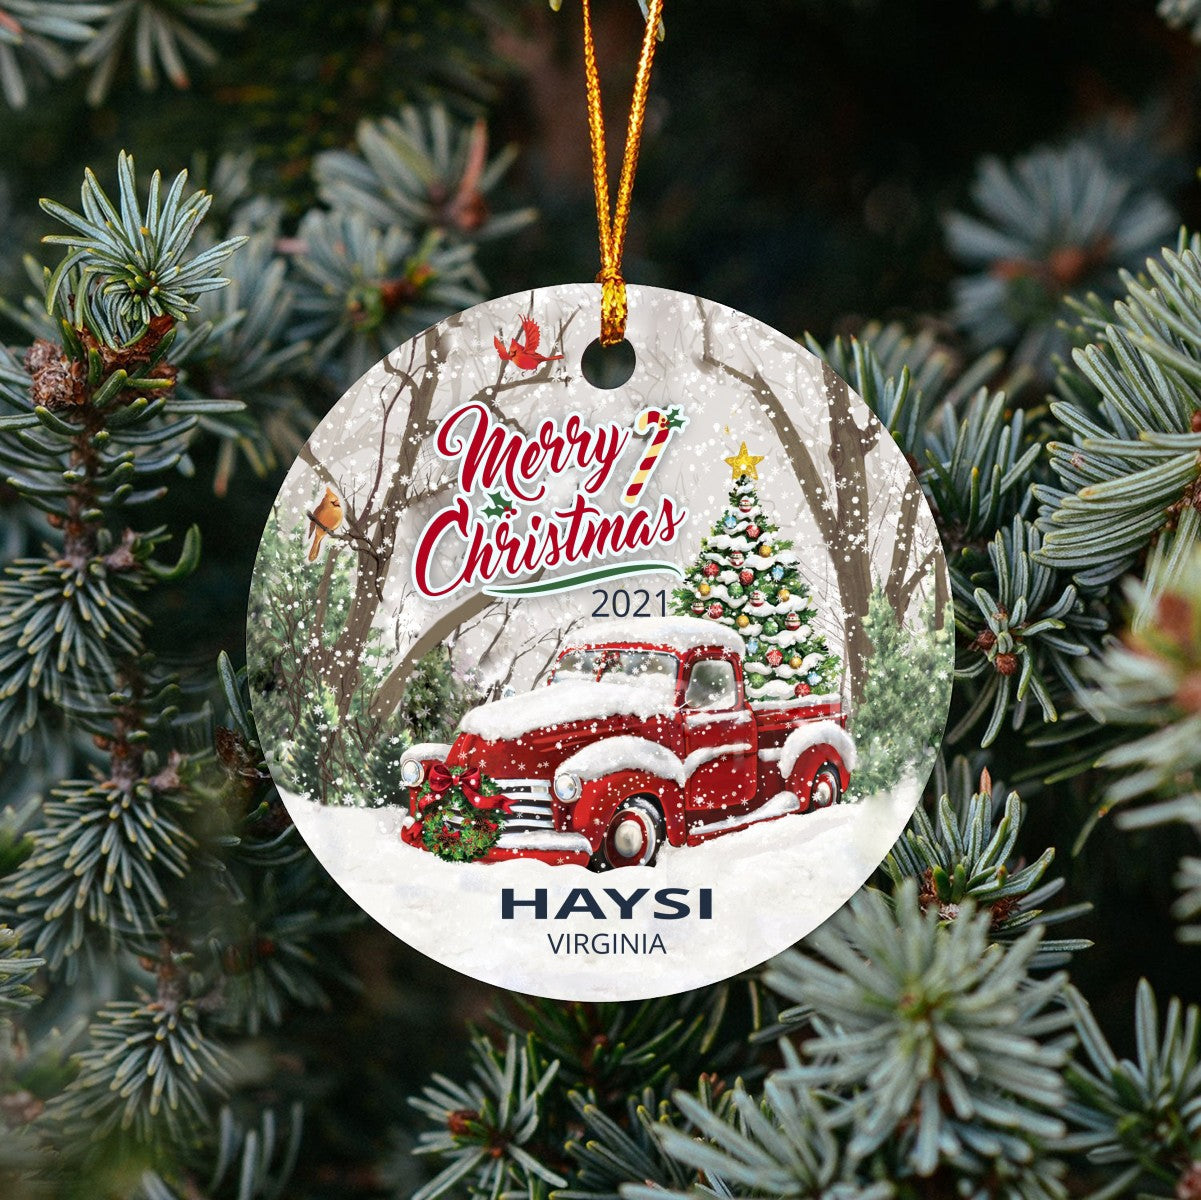 Christmas Tree Ornaments Haysi - Ornament With Name City, State Haysi Virginia VA Ornament - Red Truck Xmas Ornaments 3'' Plastic Gift For Family, Friend And Housewarming